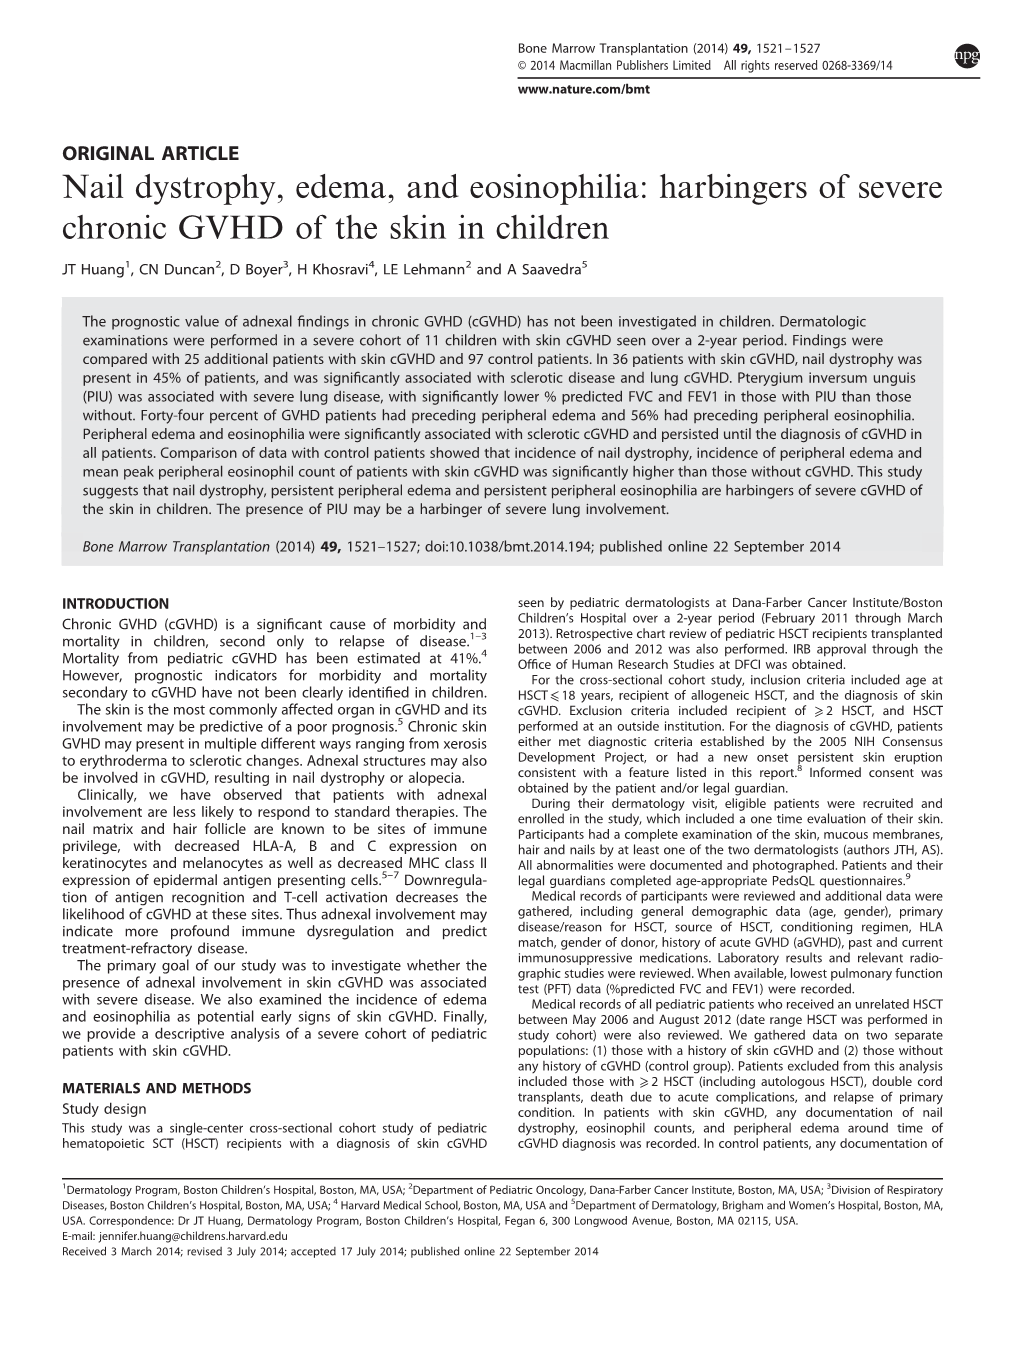 Nail Dystrophy, Edema, and Eosinophilia: Harbingers of Severe Chronic GVHD of the Skin in Children